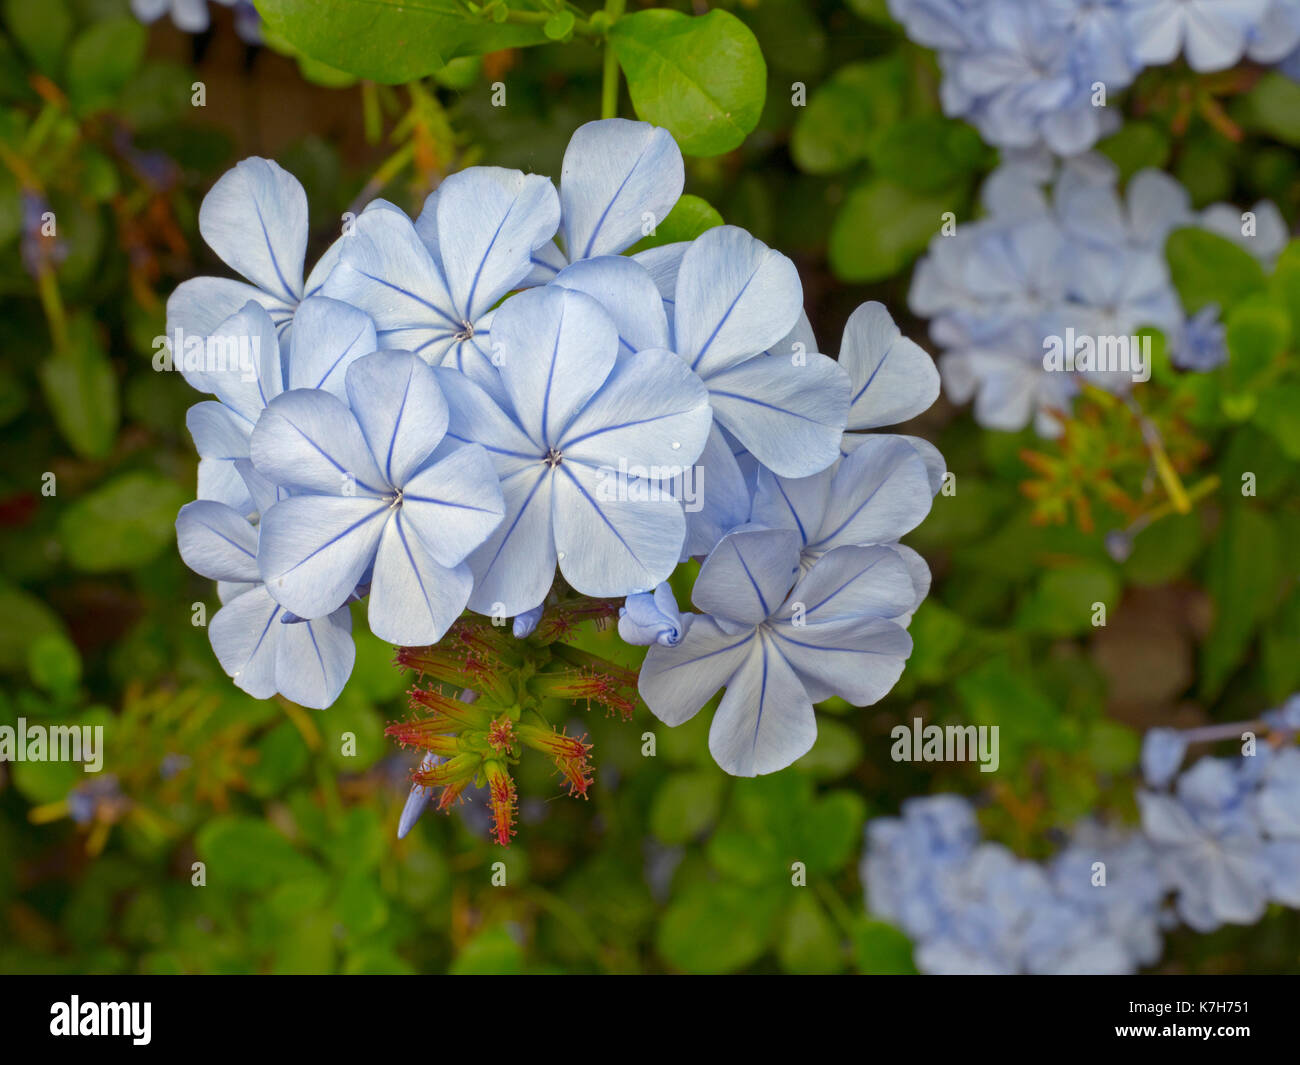 Plumbago capensis growing in large green house Stock Photo